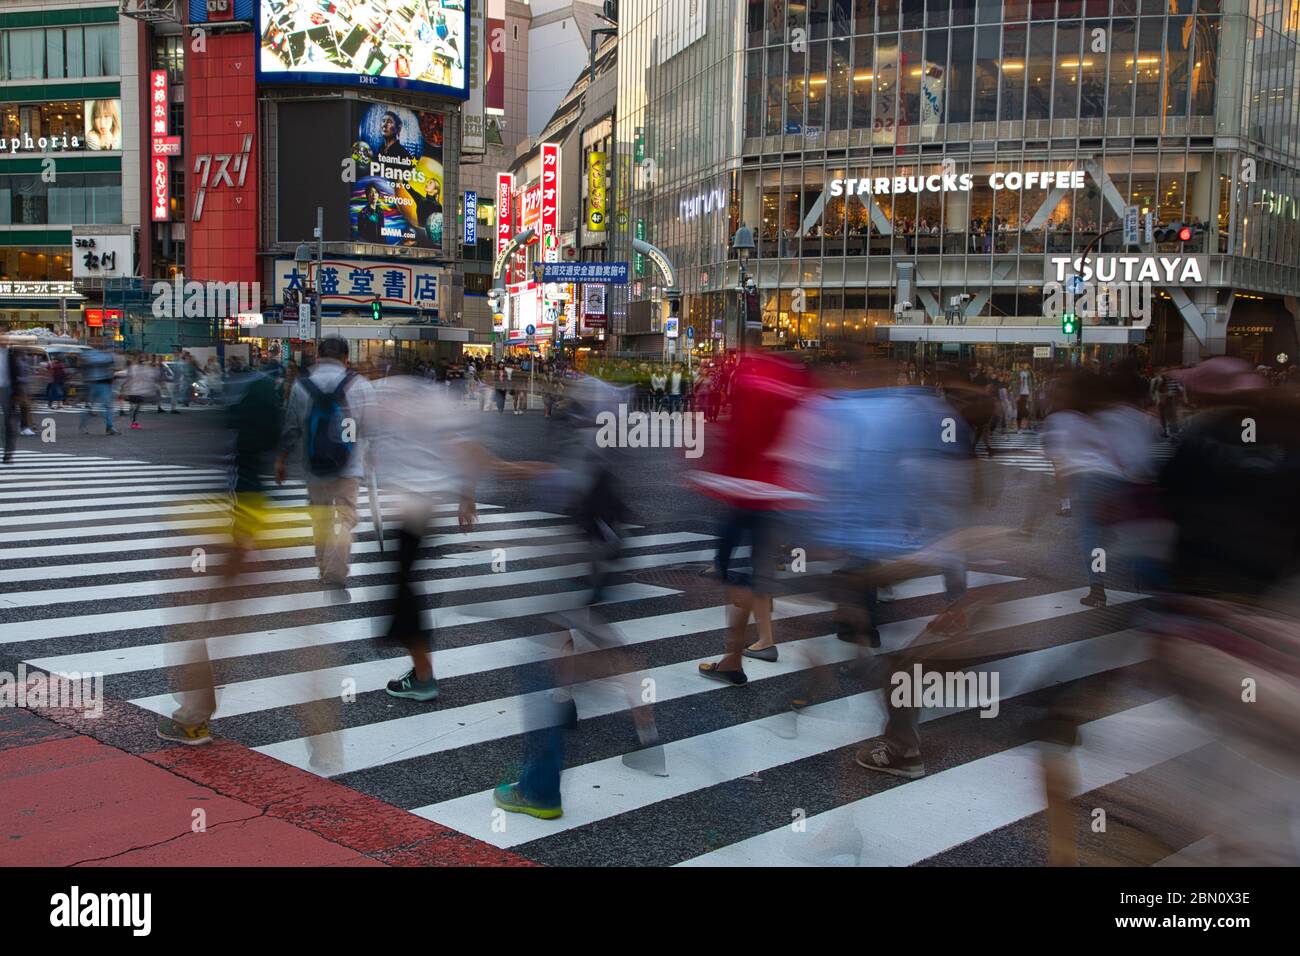 TOKYO/JAPAN - 30th July, 2019 : Shibuya Scramble is known for its busiest crossroads in the world and is the leader of most people’s must-see list in Stock Photo